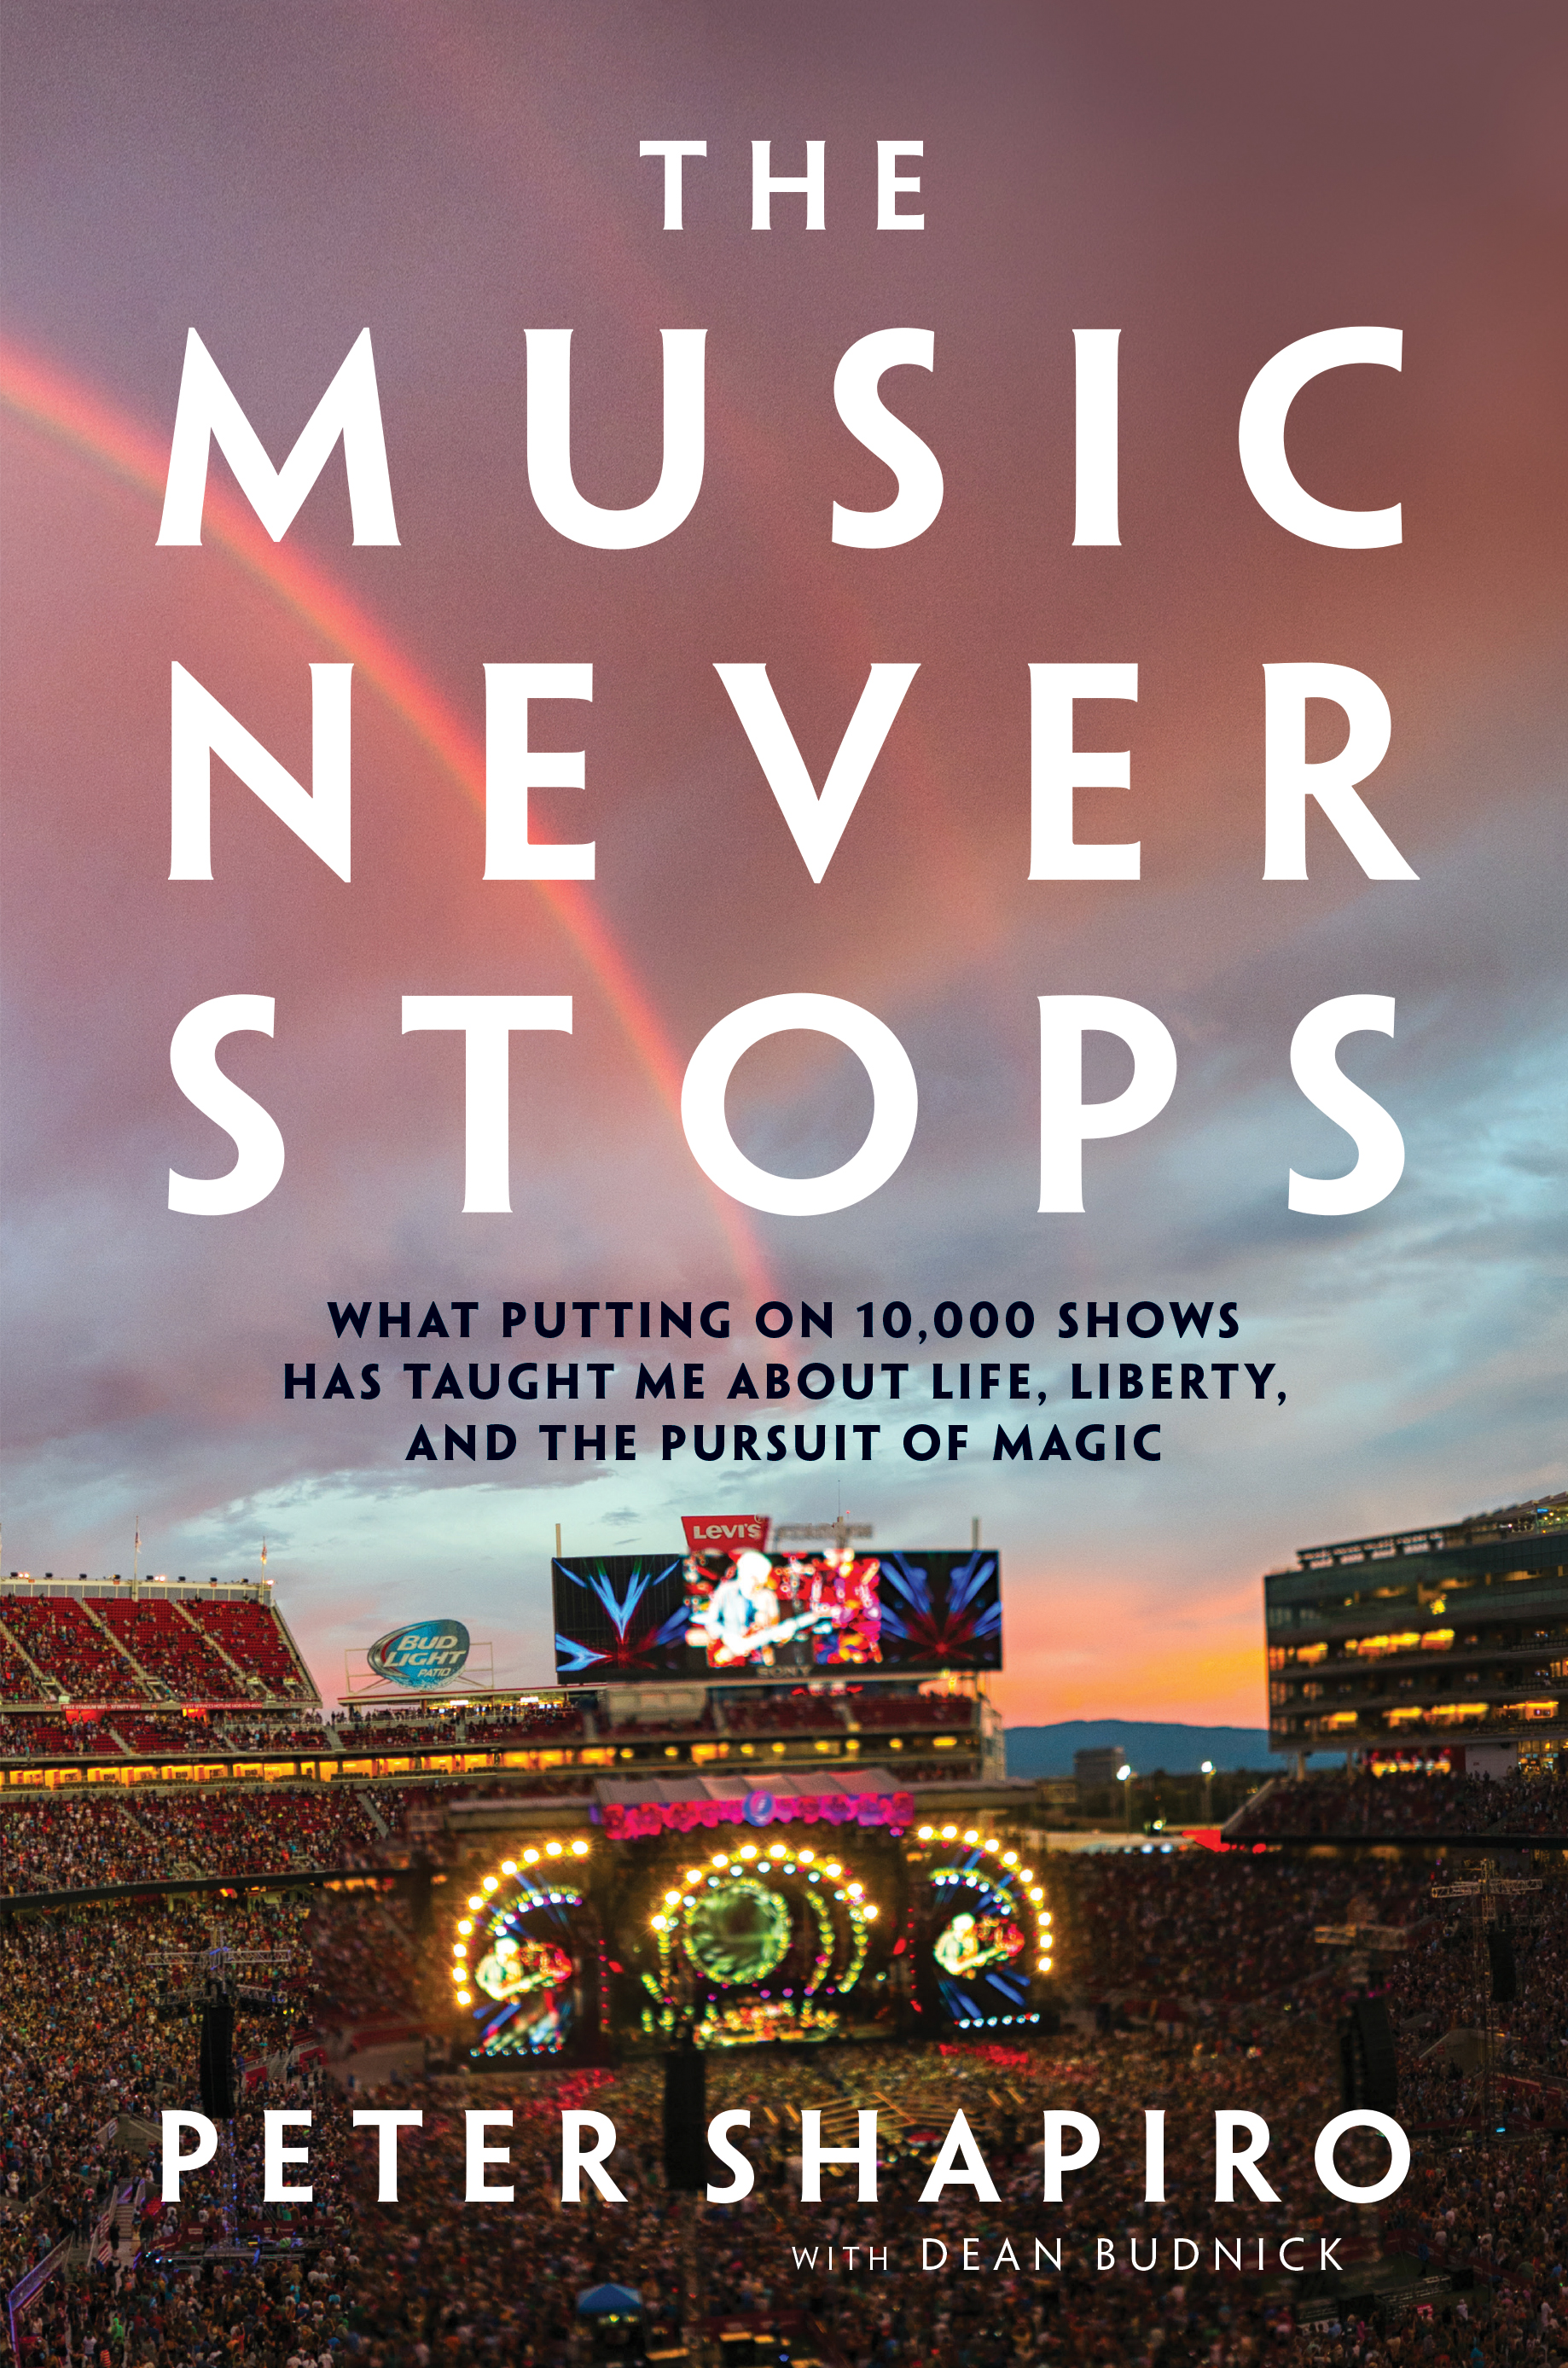 The cover of “The Music Never Stops: What Putting on 10,000 Shows Has Taught Me About Life, Liberty, and the Pursuit of Magic”